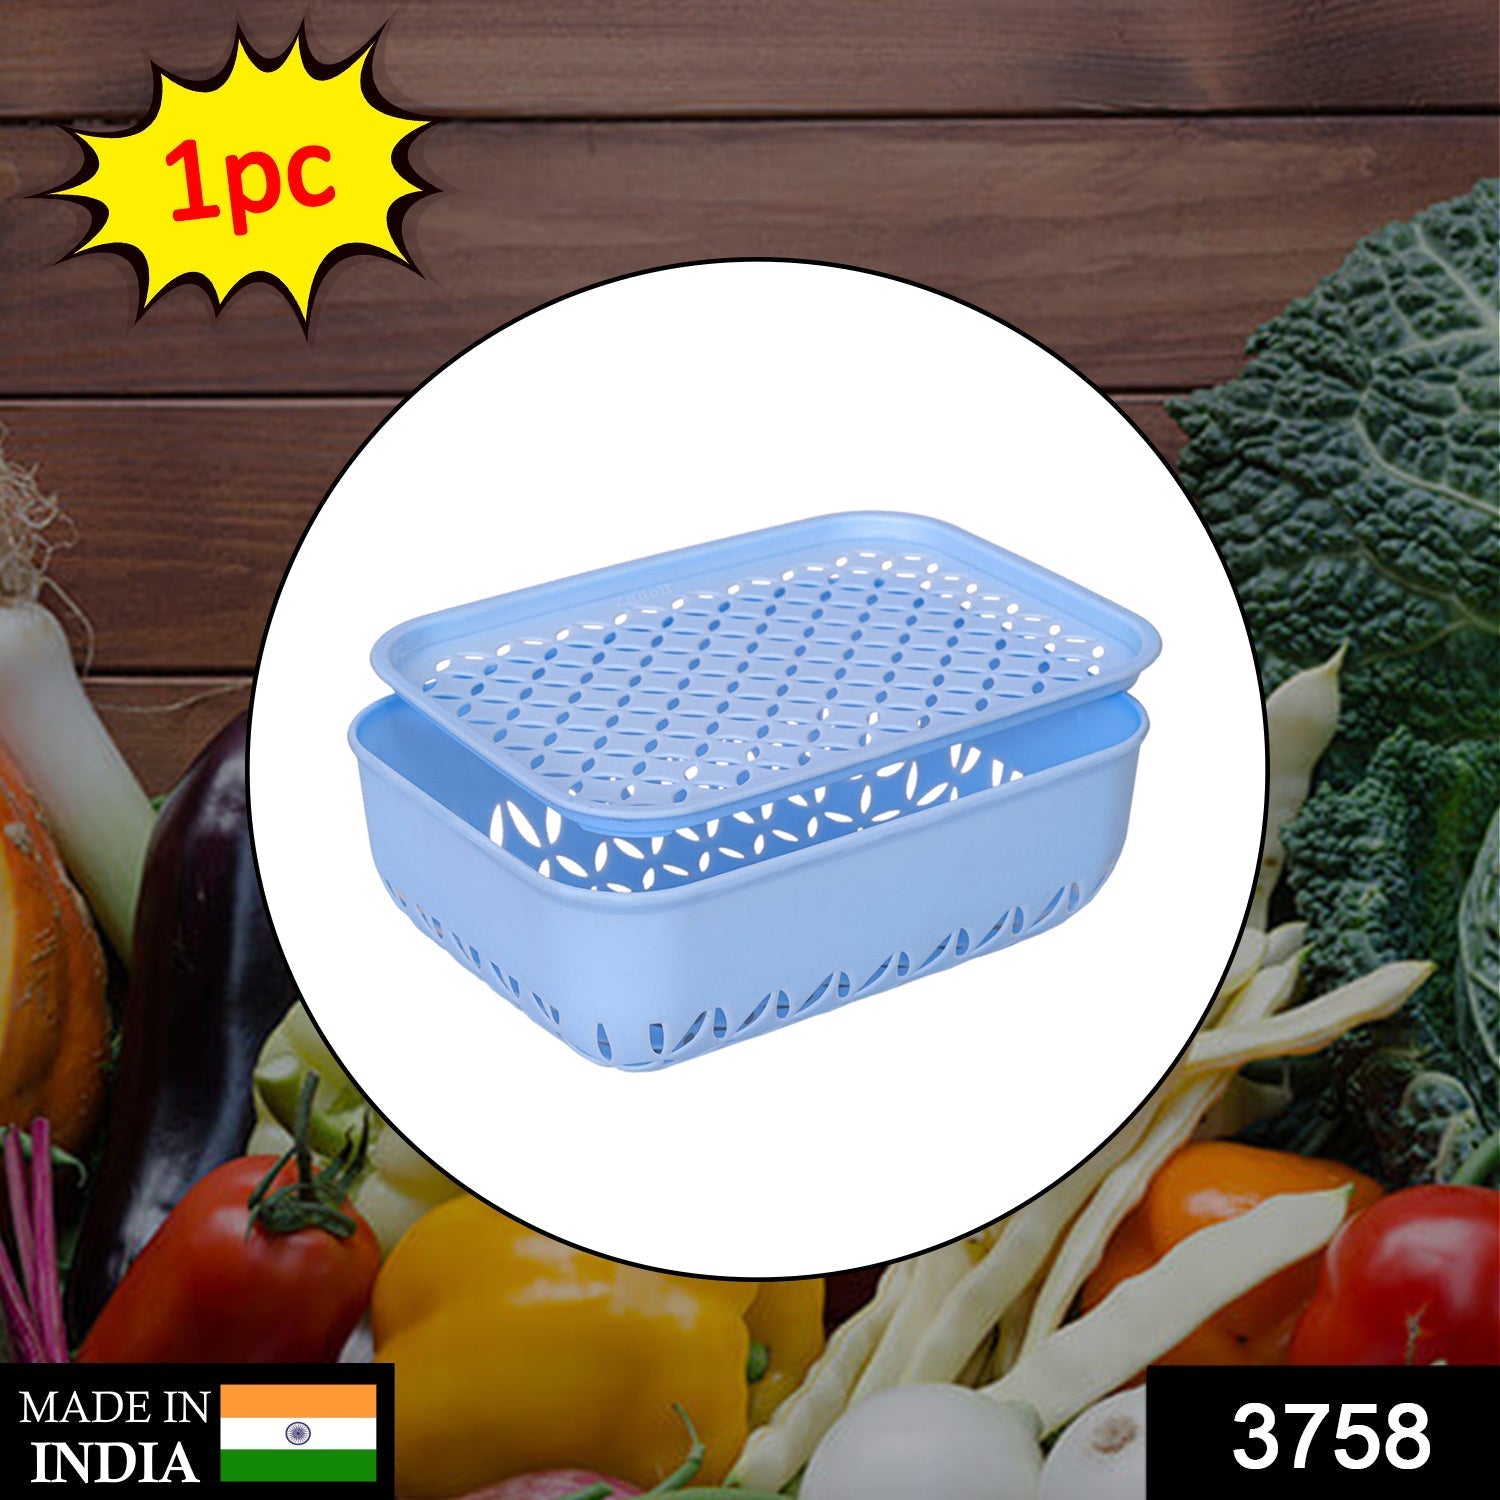 3758 1 Pc Kothmir Basket widely used in all types of household places for holding and storing various kinds of fruits and vegetables etc. DeoDap